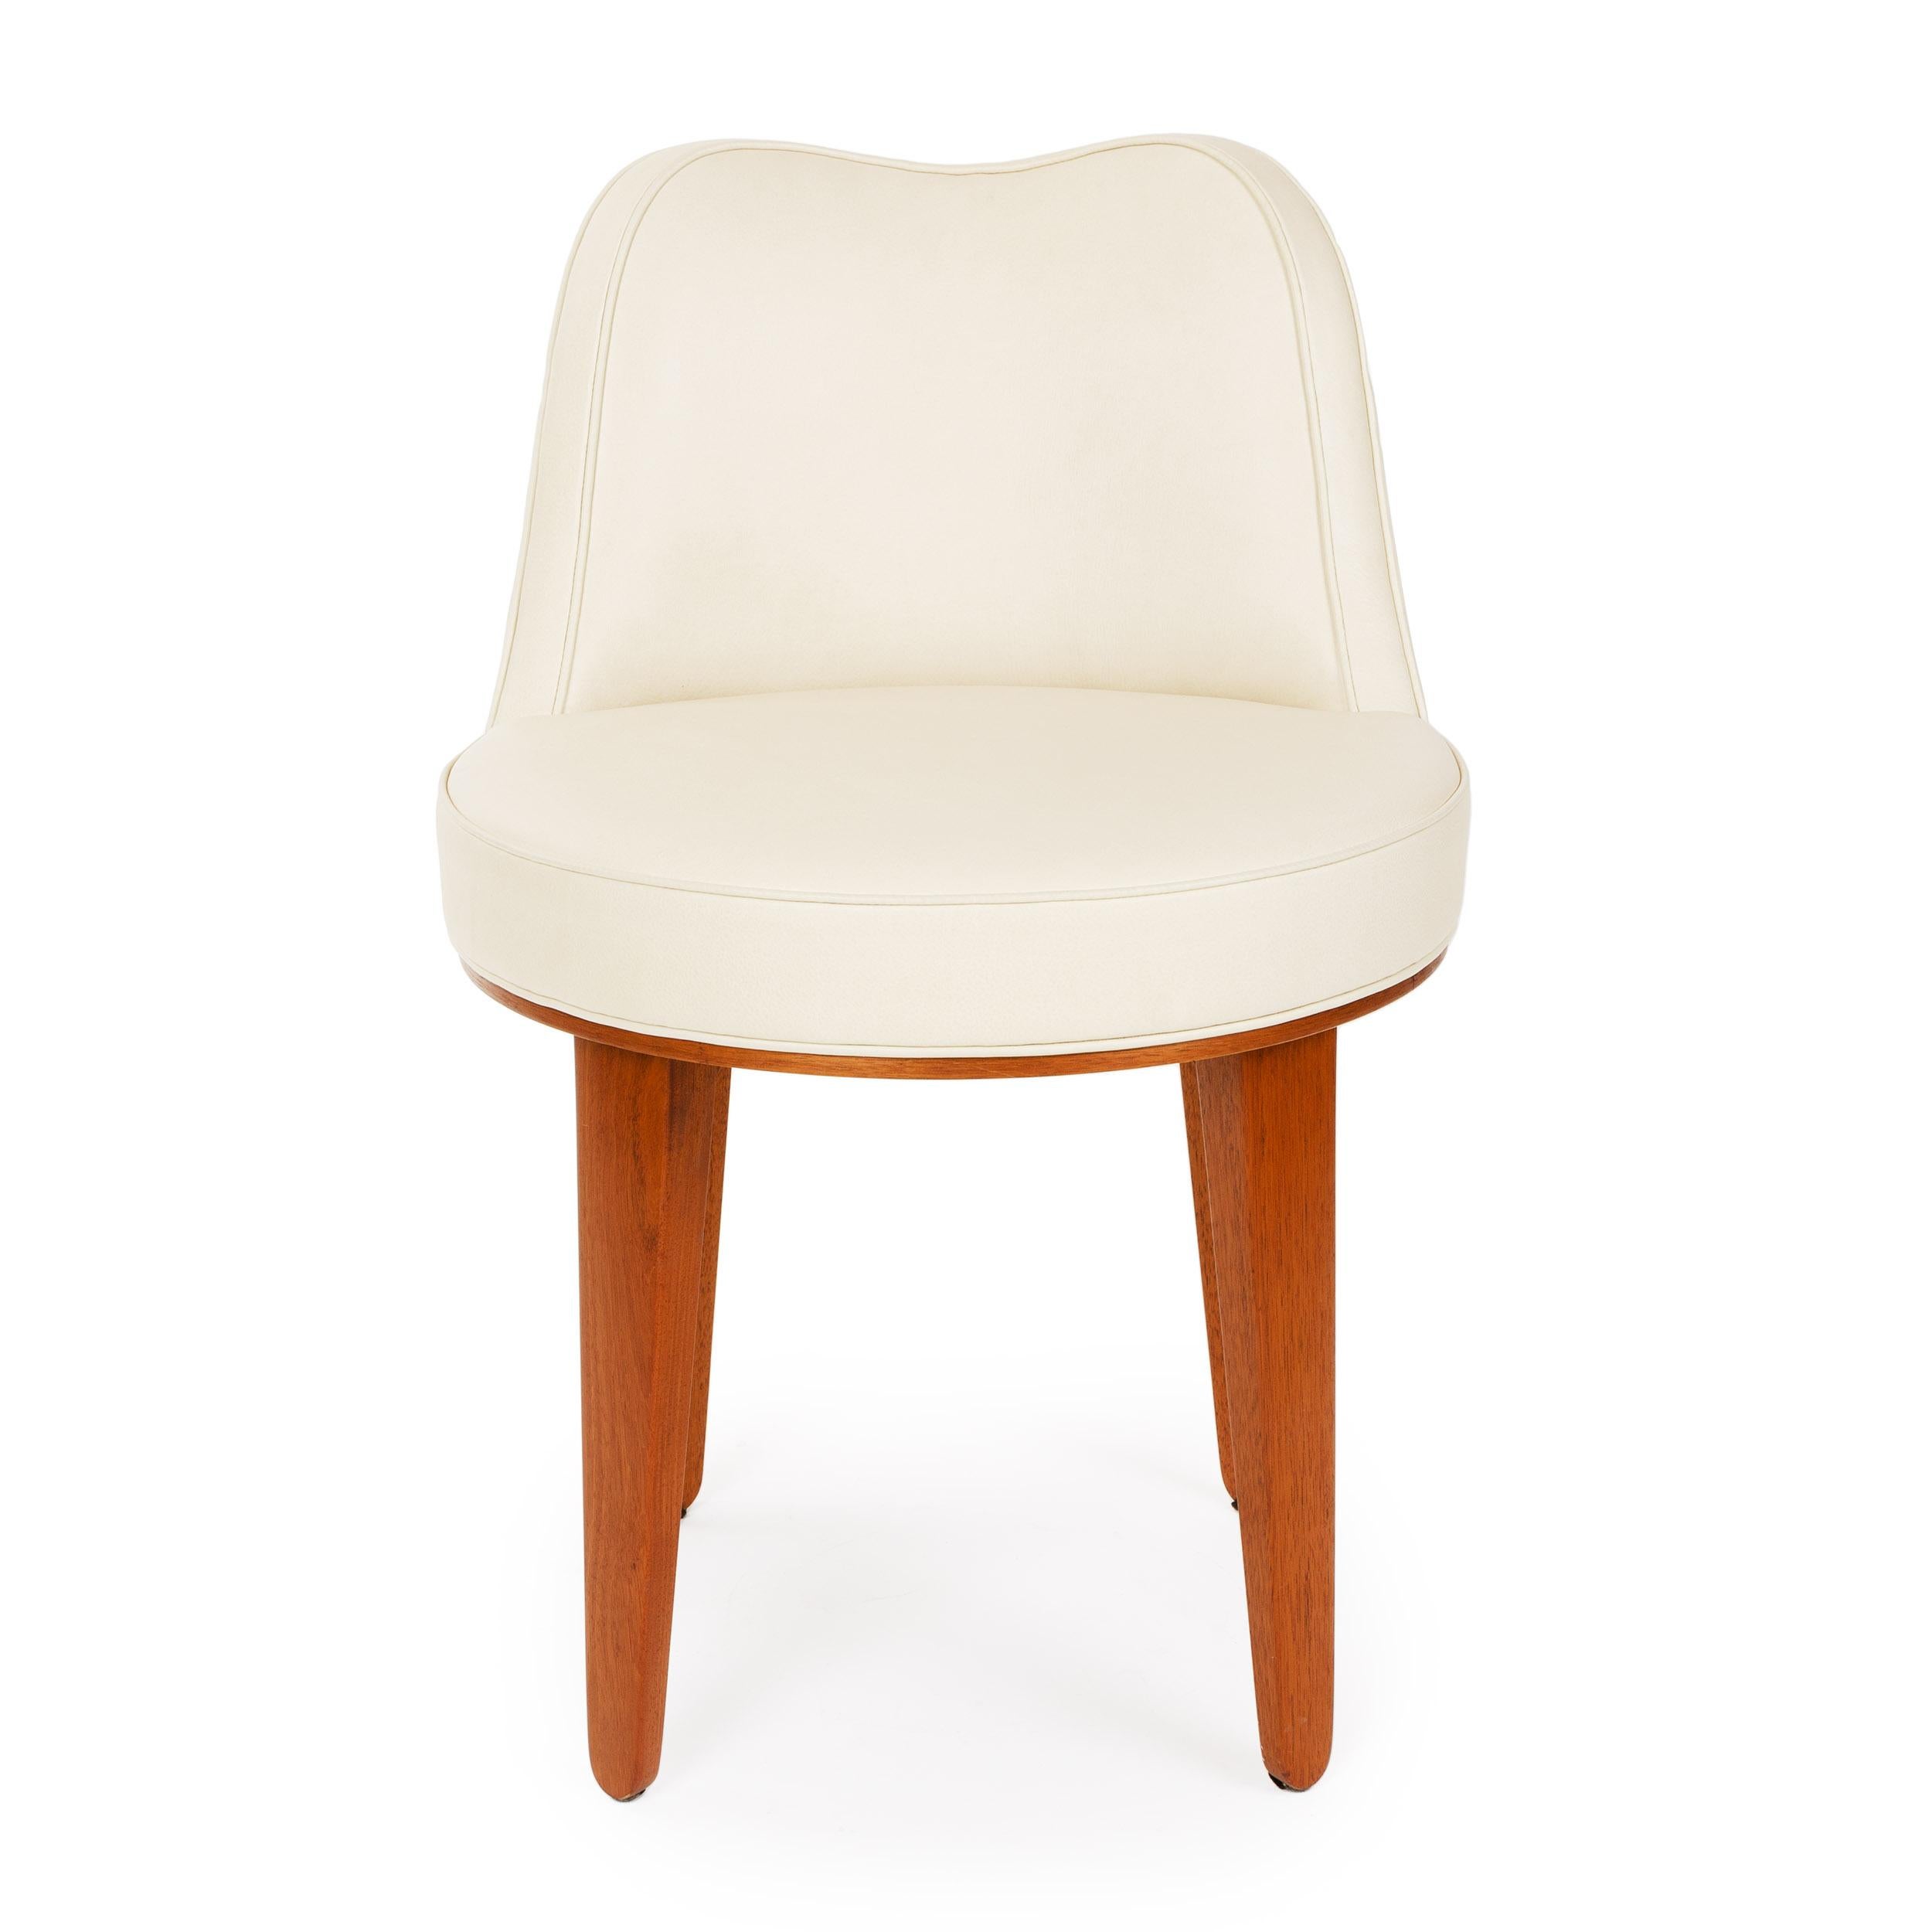 A small sway backed swivel chair with hairpin tapered natural mahogany legs. Newly reupholstered in putty leather.